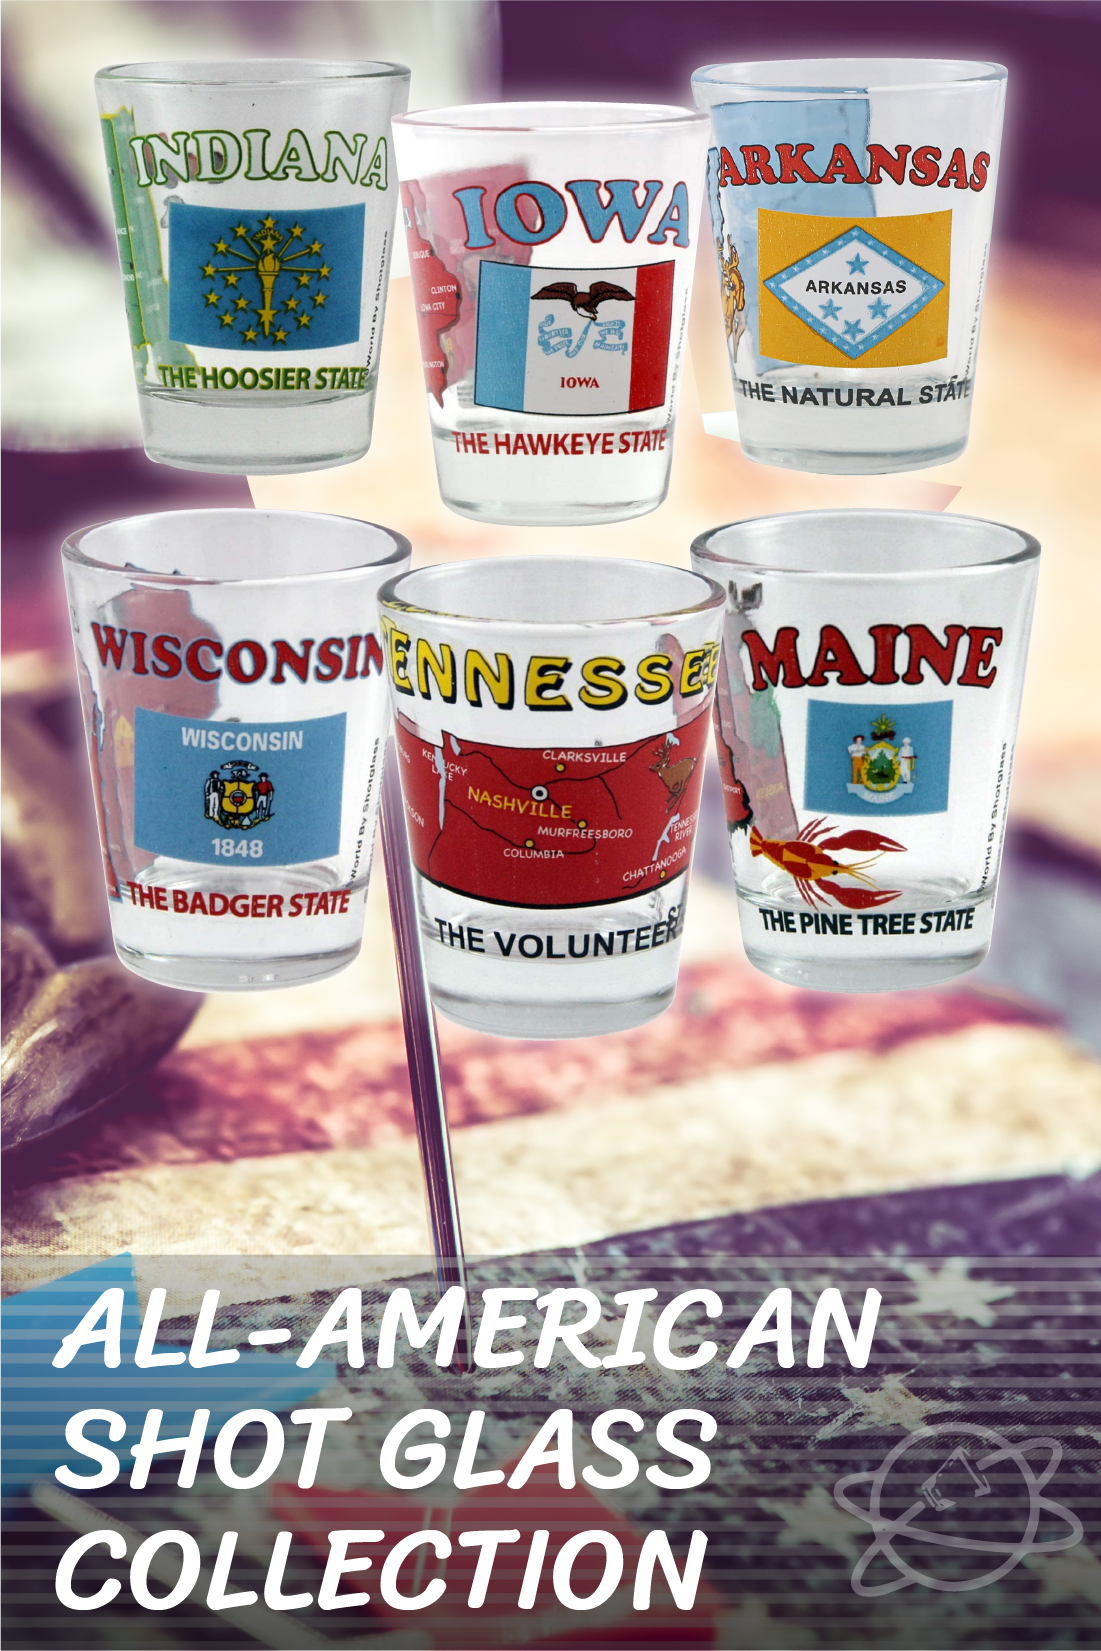 All-American Shot Glass Collection